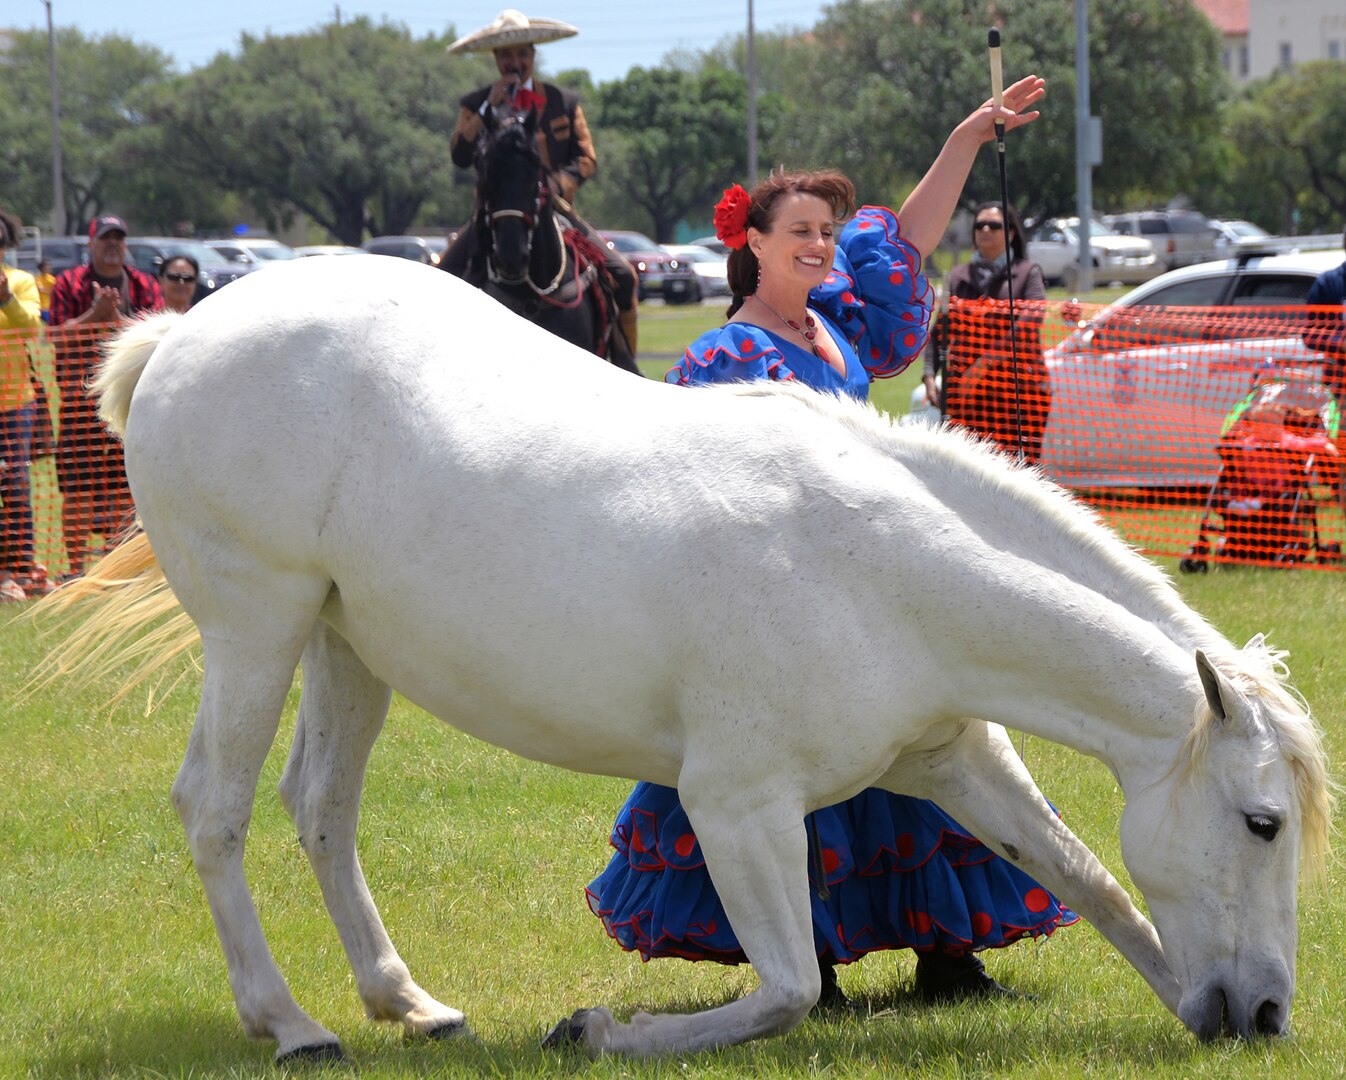 Impressive feats of horsemanship were on display during exhibition of Spanish horses during the annual Cowboys and Heroes event held at MacArthur Parade Field at Joint Base San Antonio-Fort Sam Houston April 14.